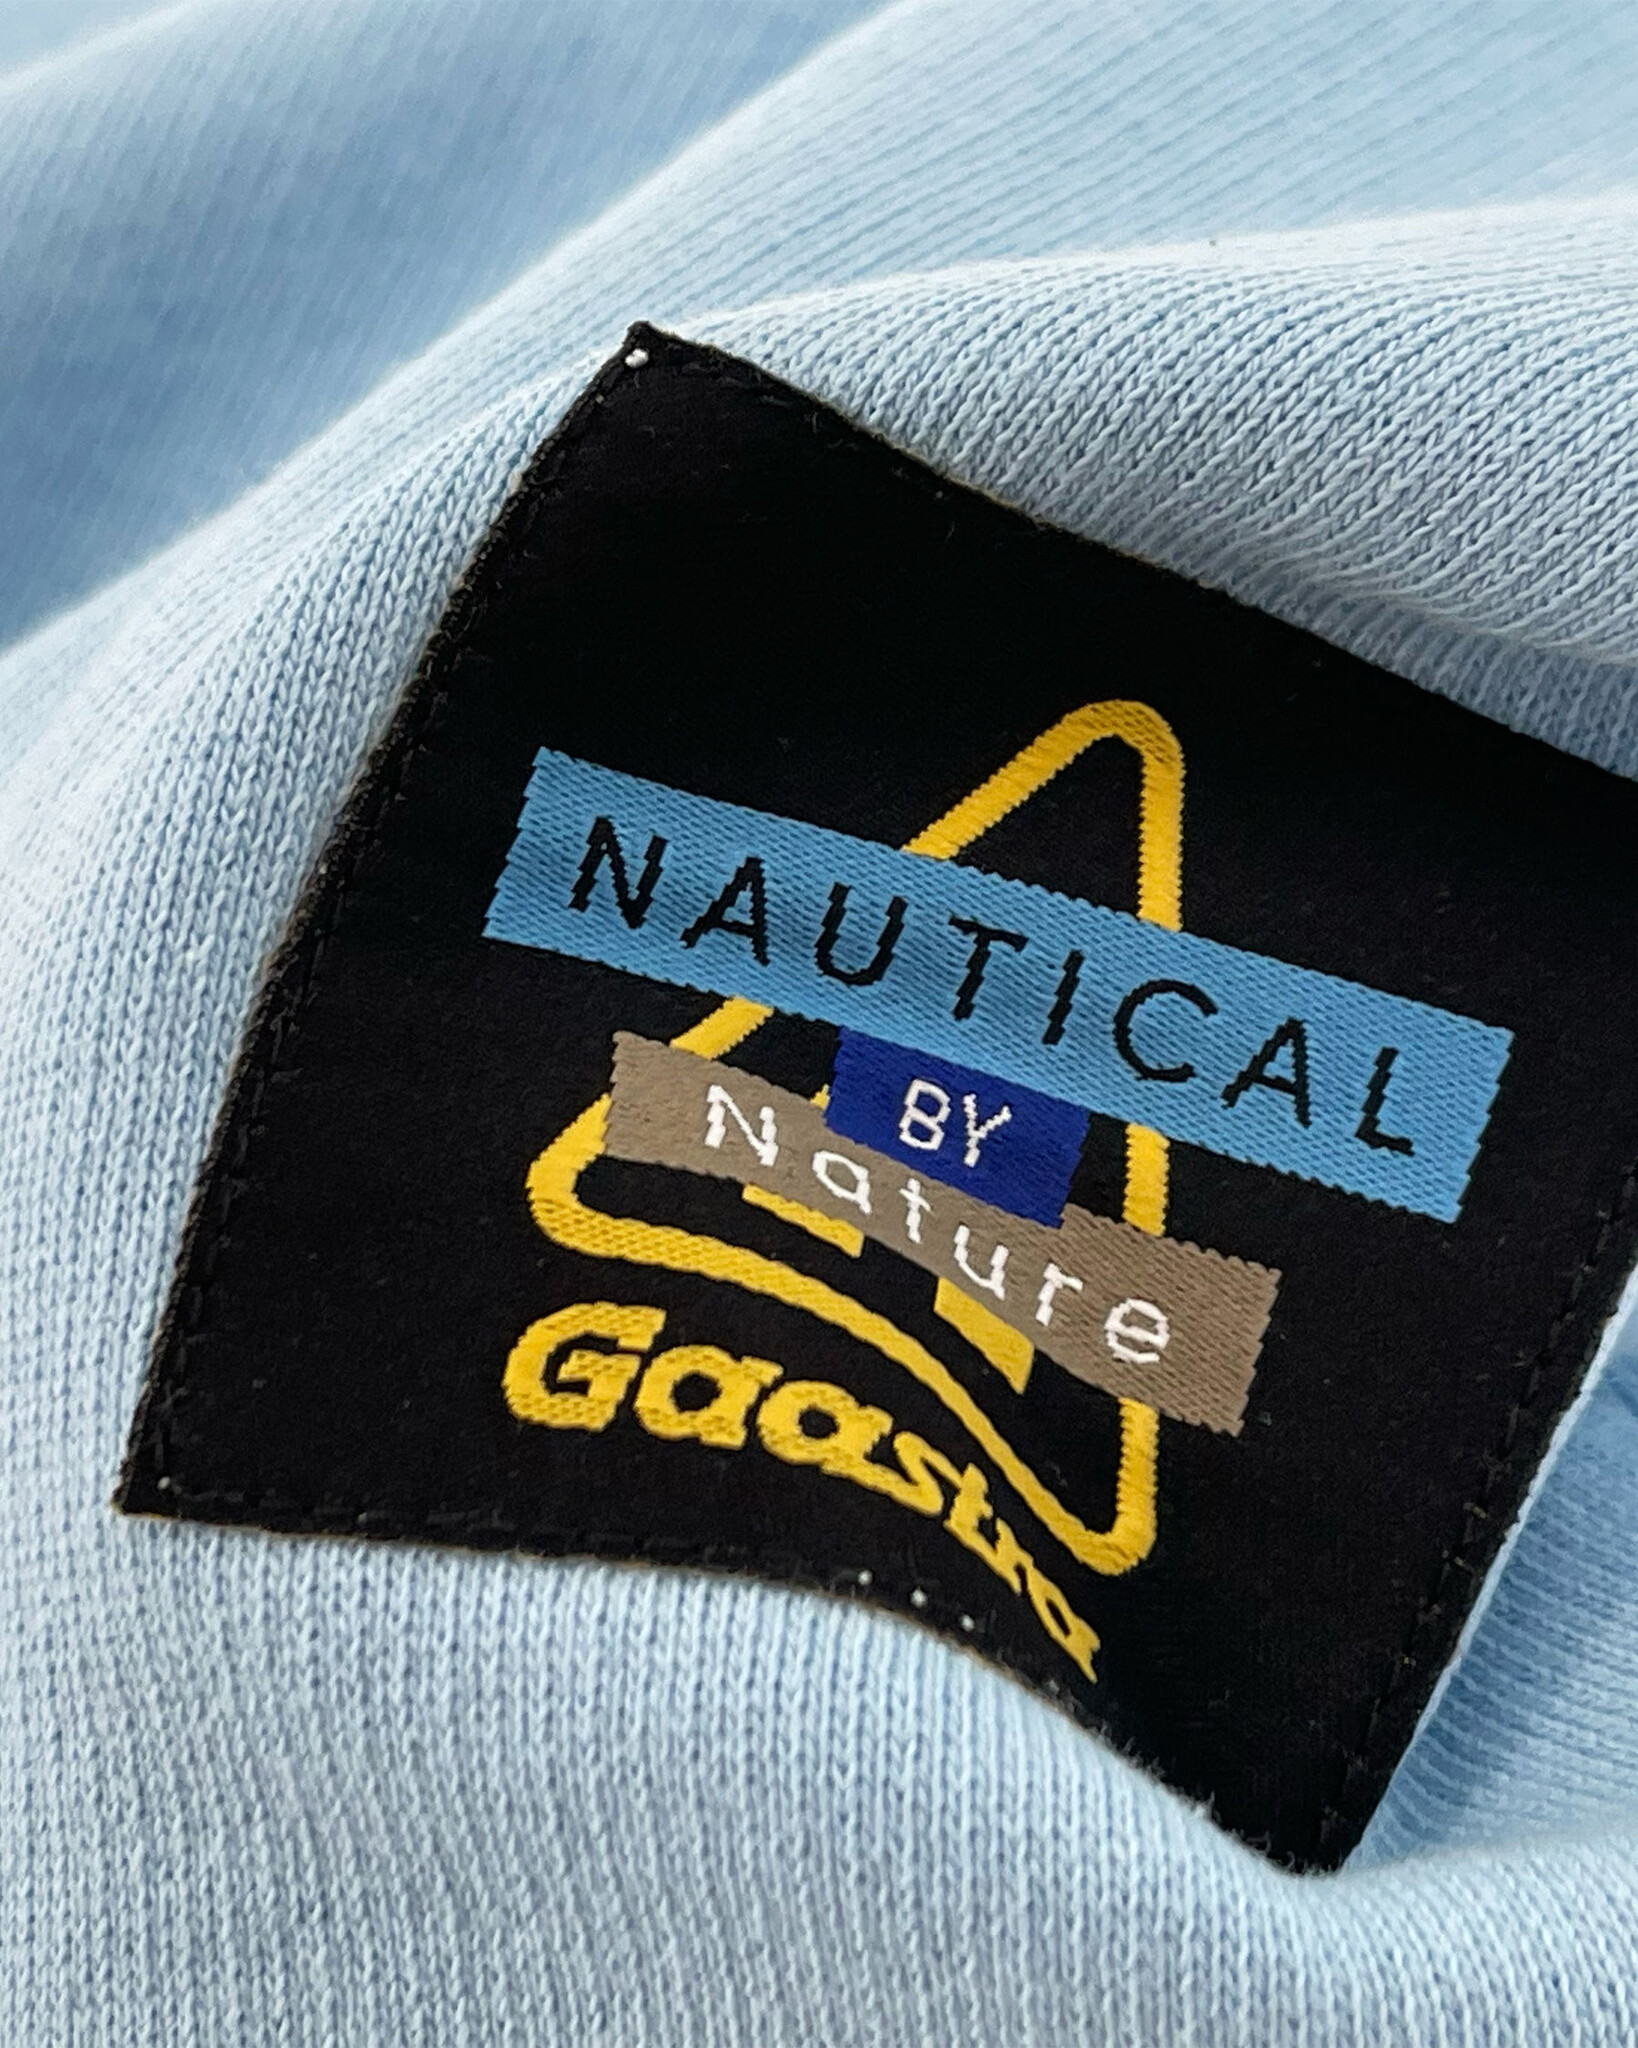 Half zip sweater from the Unique Gaastra Vintage Sports Programme